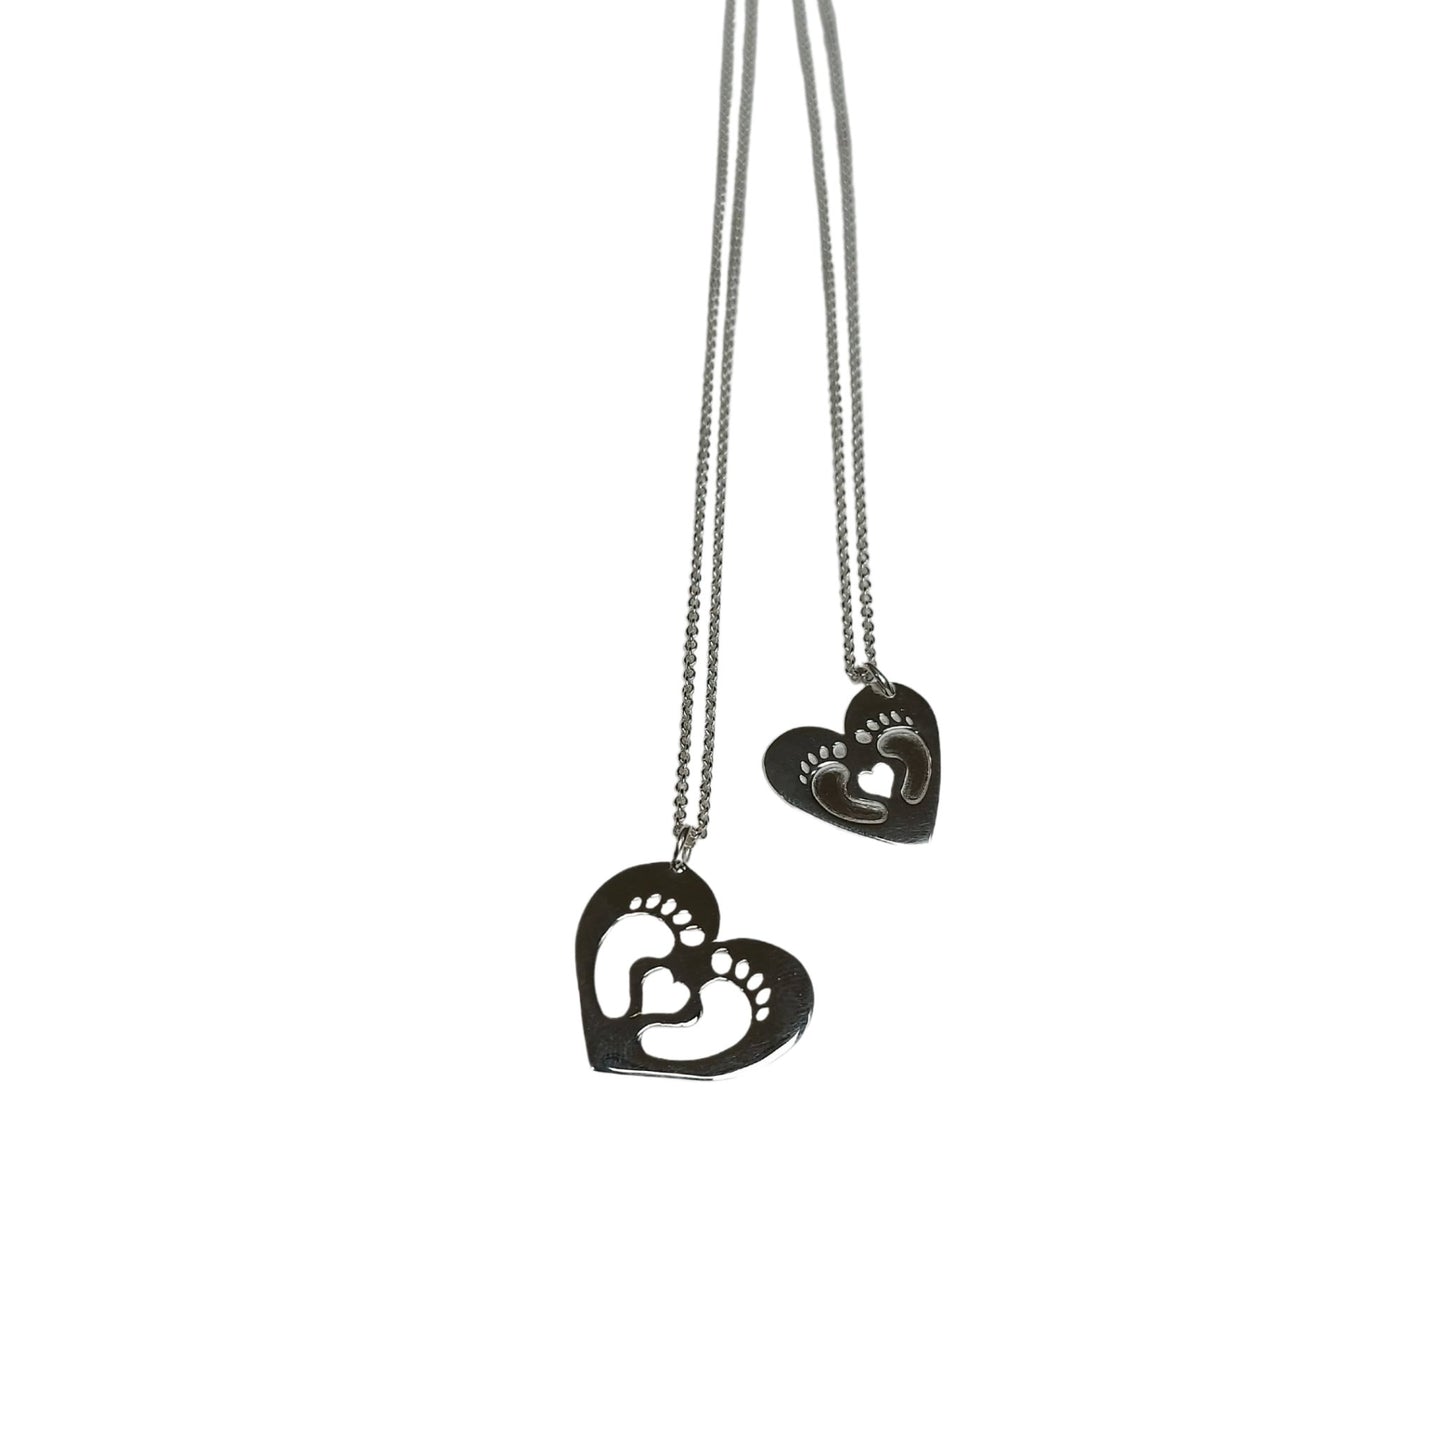 Two clubfoot inspired heart necklaces. One with little feet cut outs, the other with feet embossed around small heart